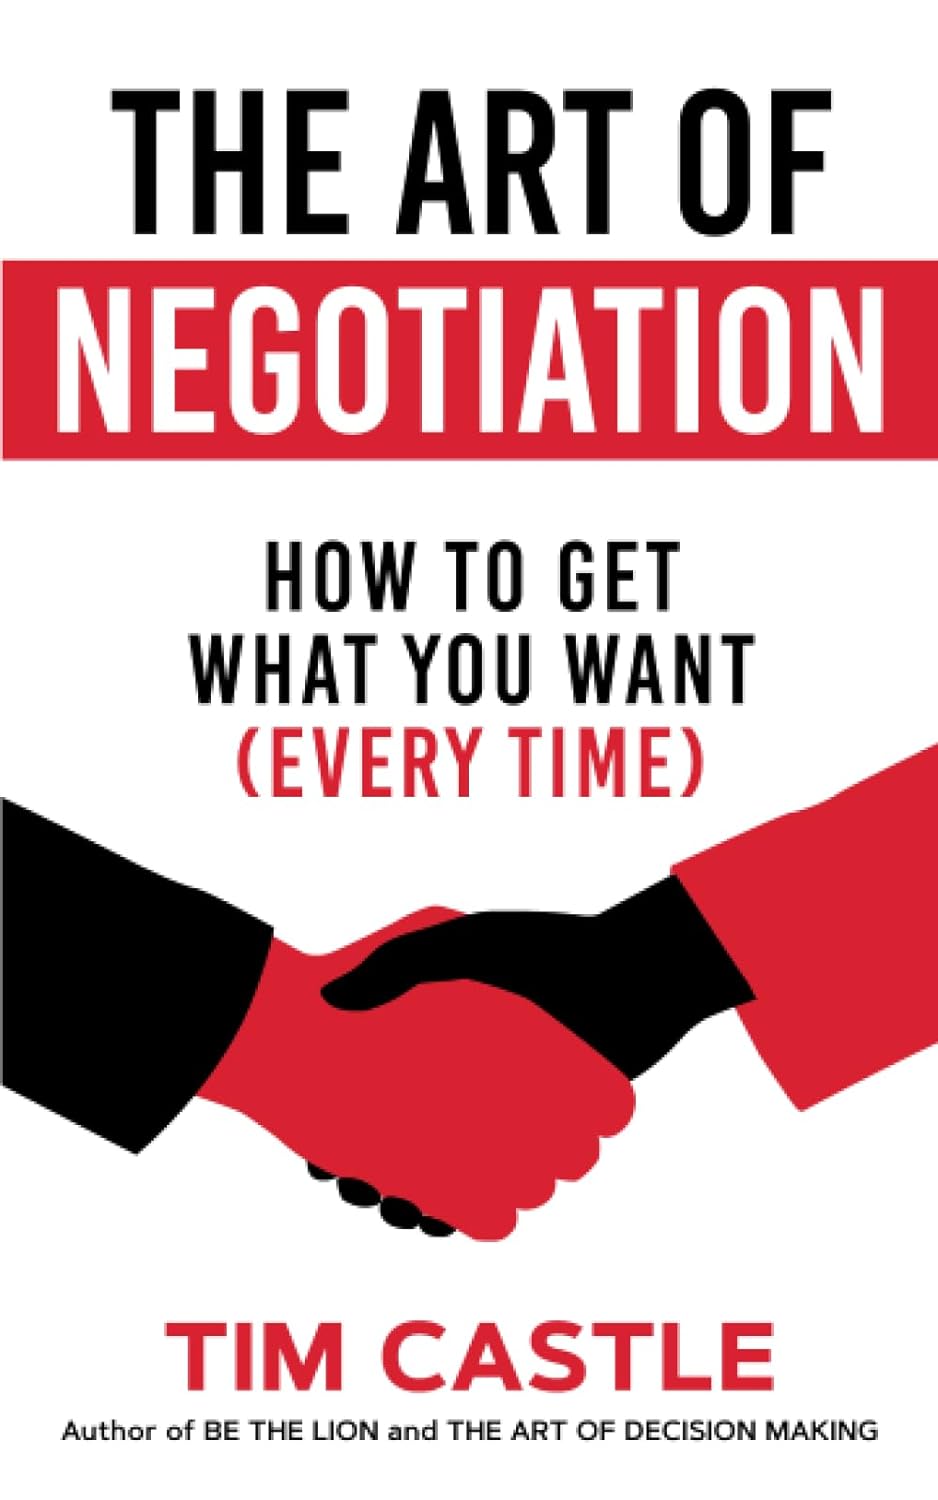 the art of negotiation for men in their 30s